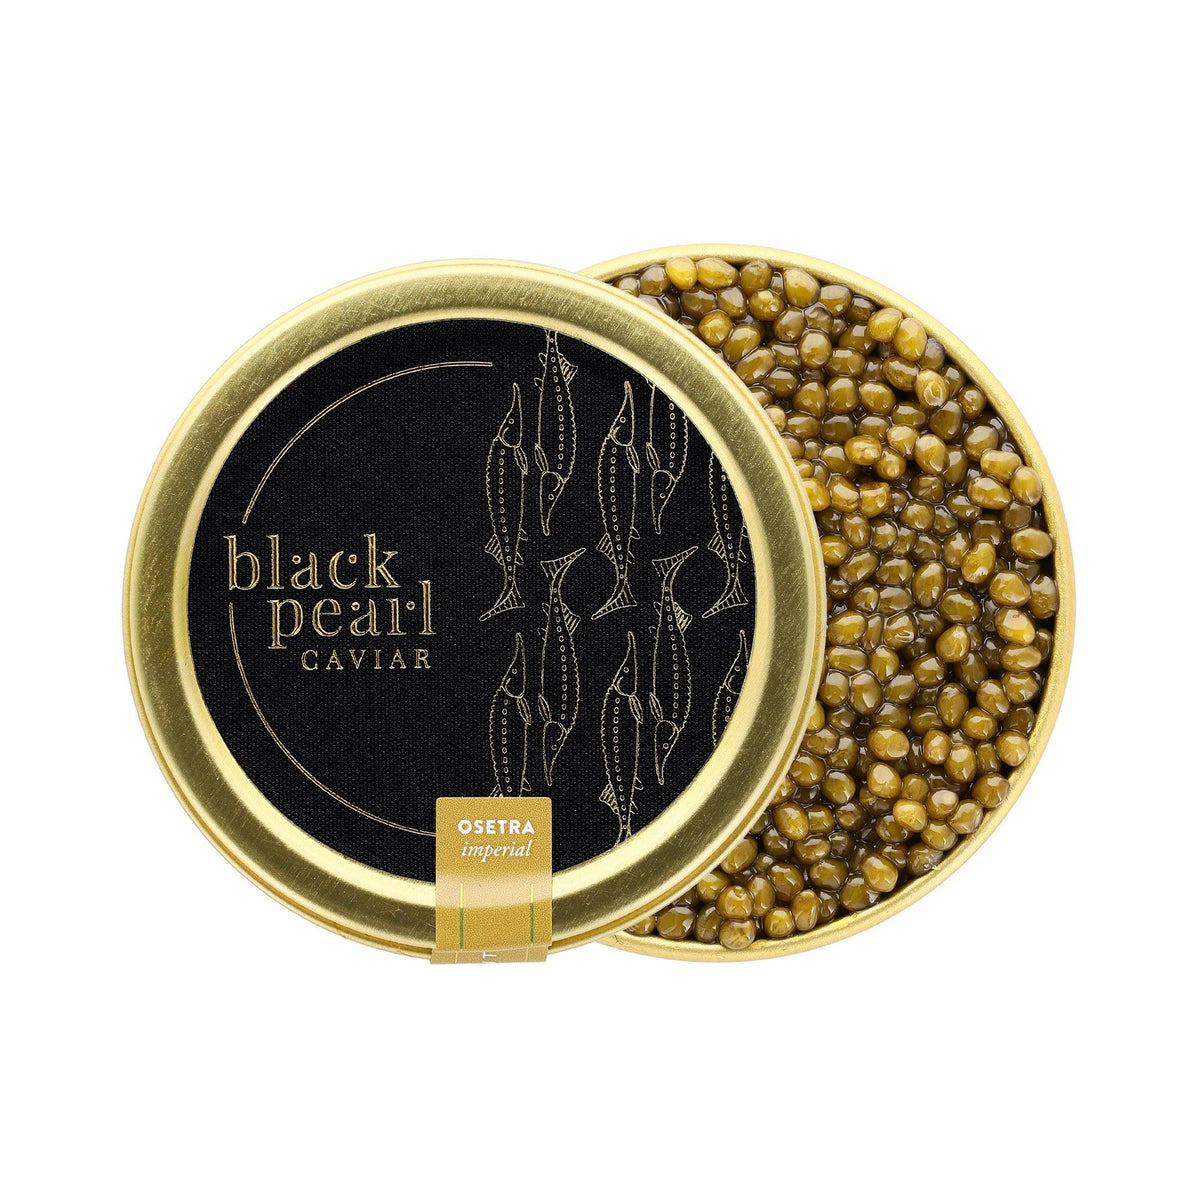 exclusive selection, large gold caviar, clean taste with bold flavors